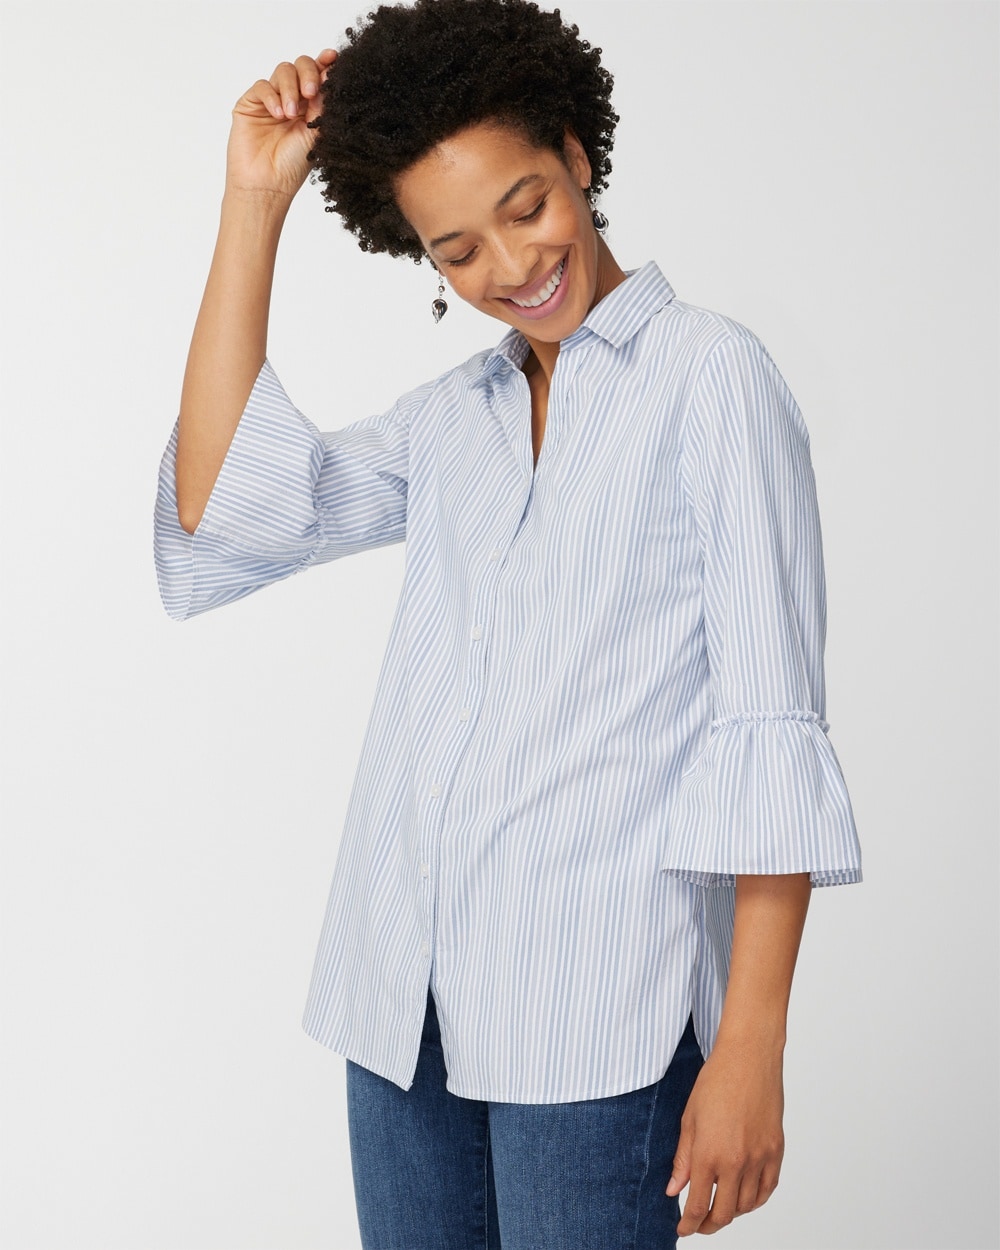 Marin Co. Stripe Ruffle-Sleeve Button-Front Top